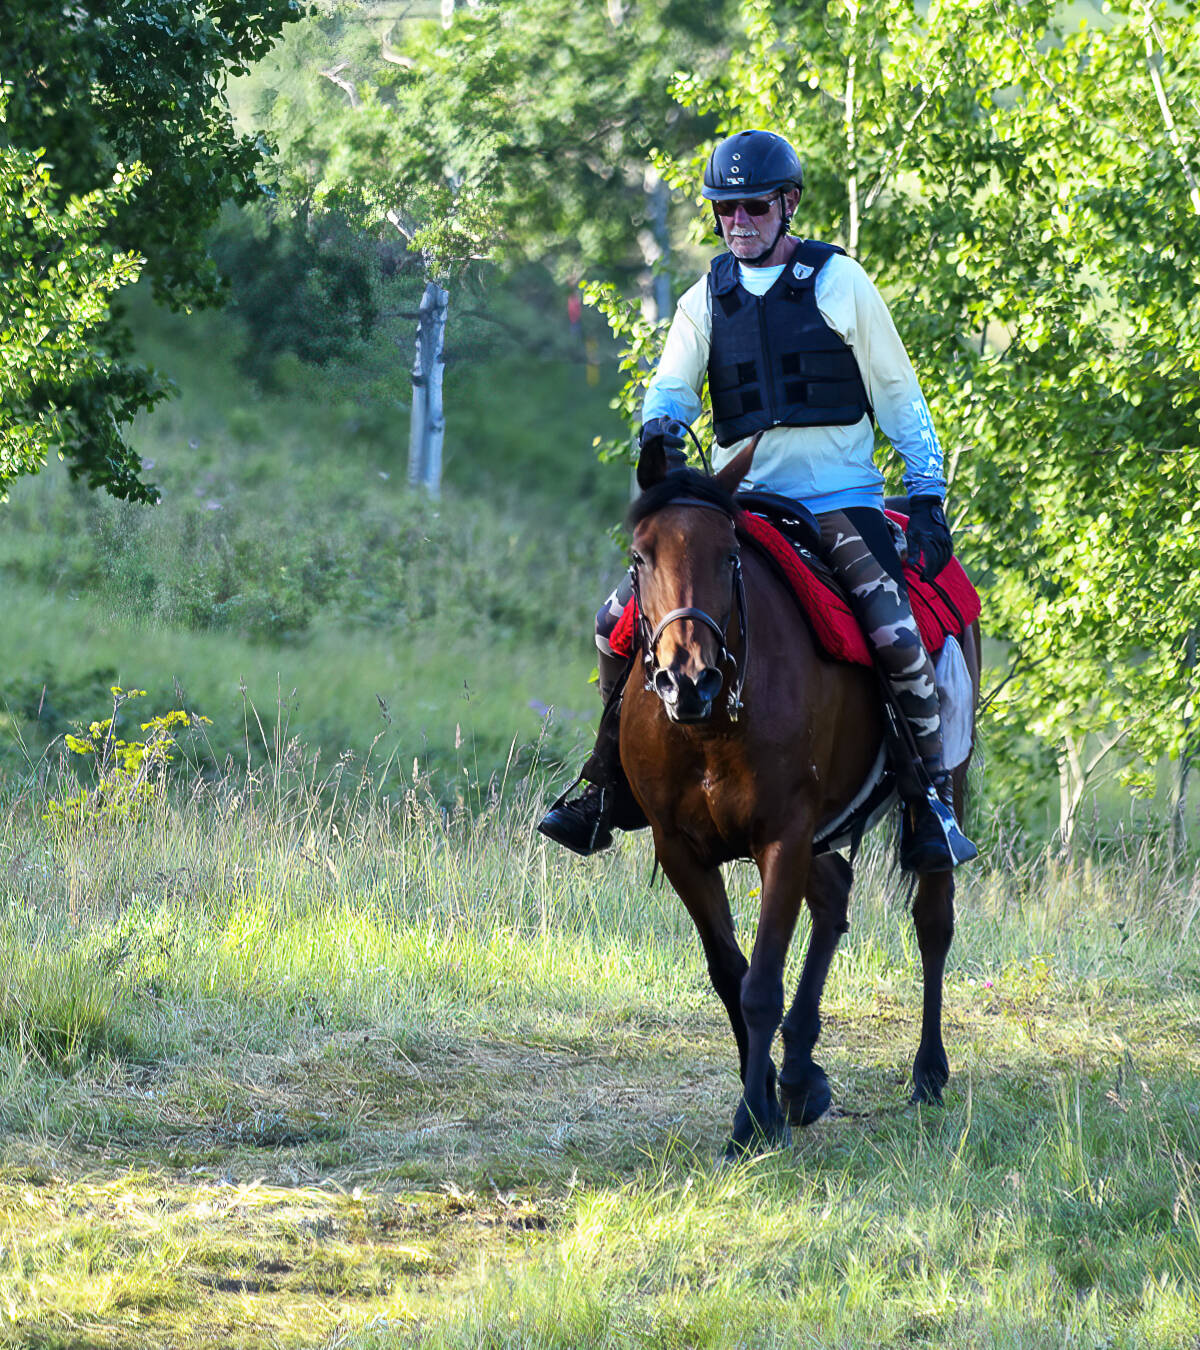 Cariboo Gold Rush Endurance Ride tests equestrian's mettle - 100